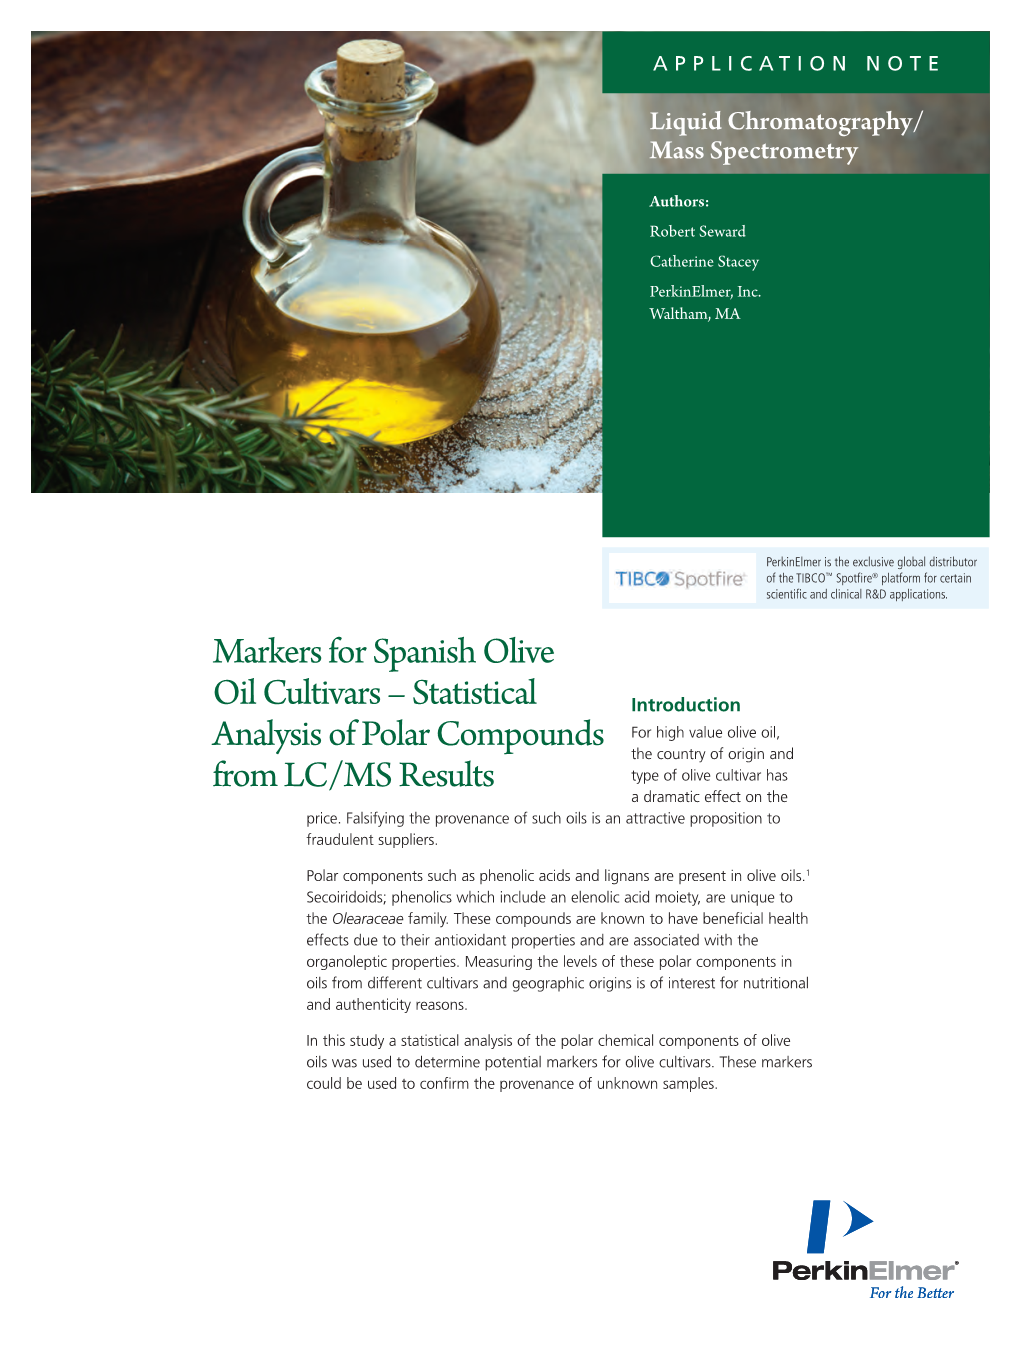 Markers for Spanish Olive Oil Cultivars-Statistical Analysis of Polar